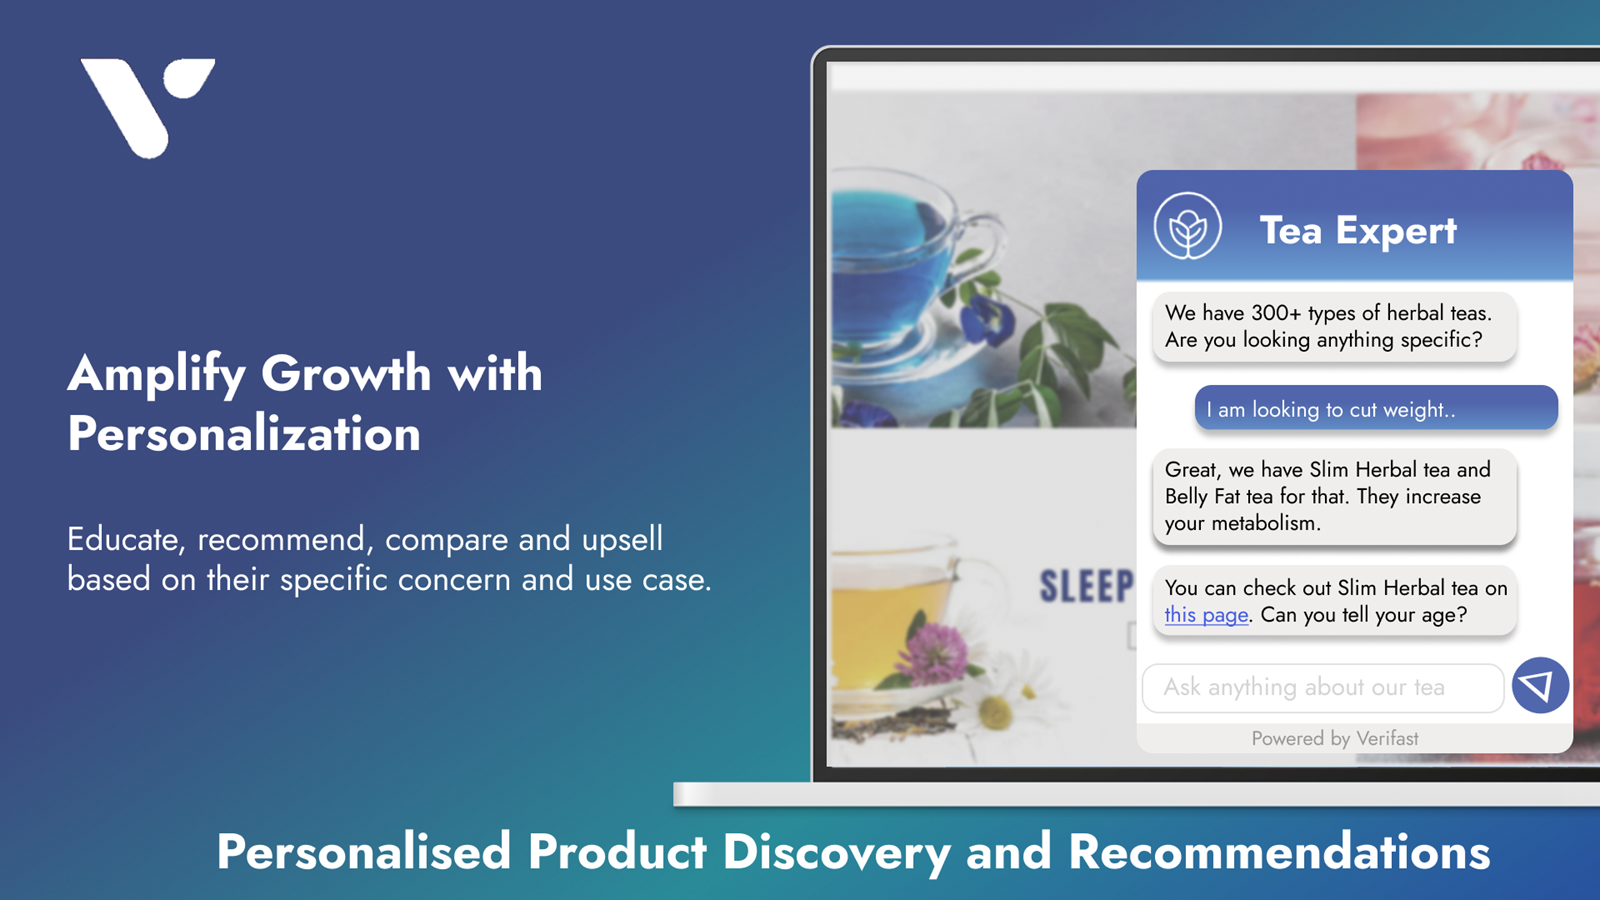 Provide personalised recommendation and answers to customer